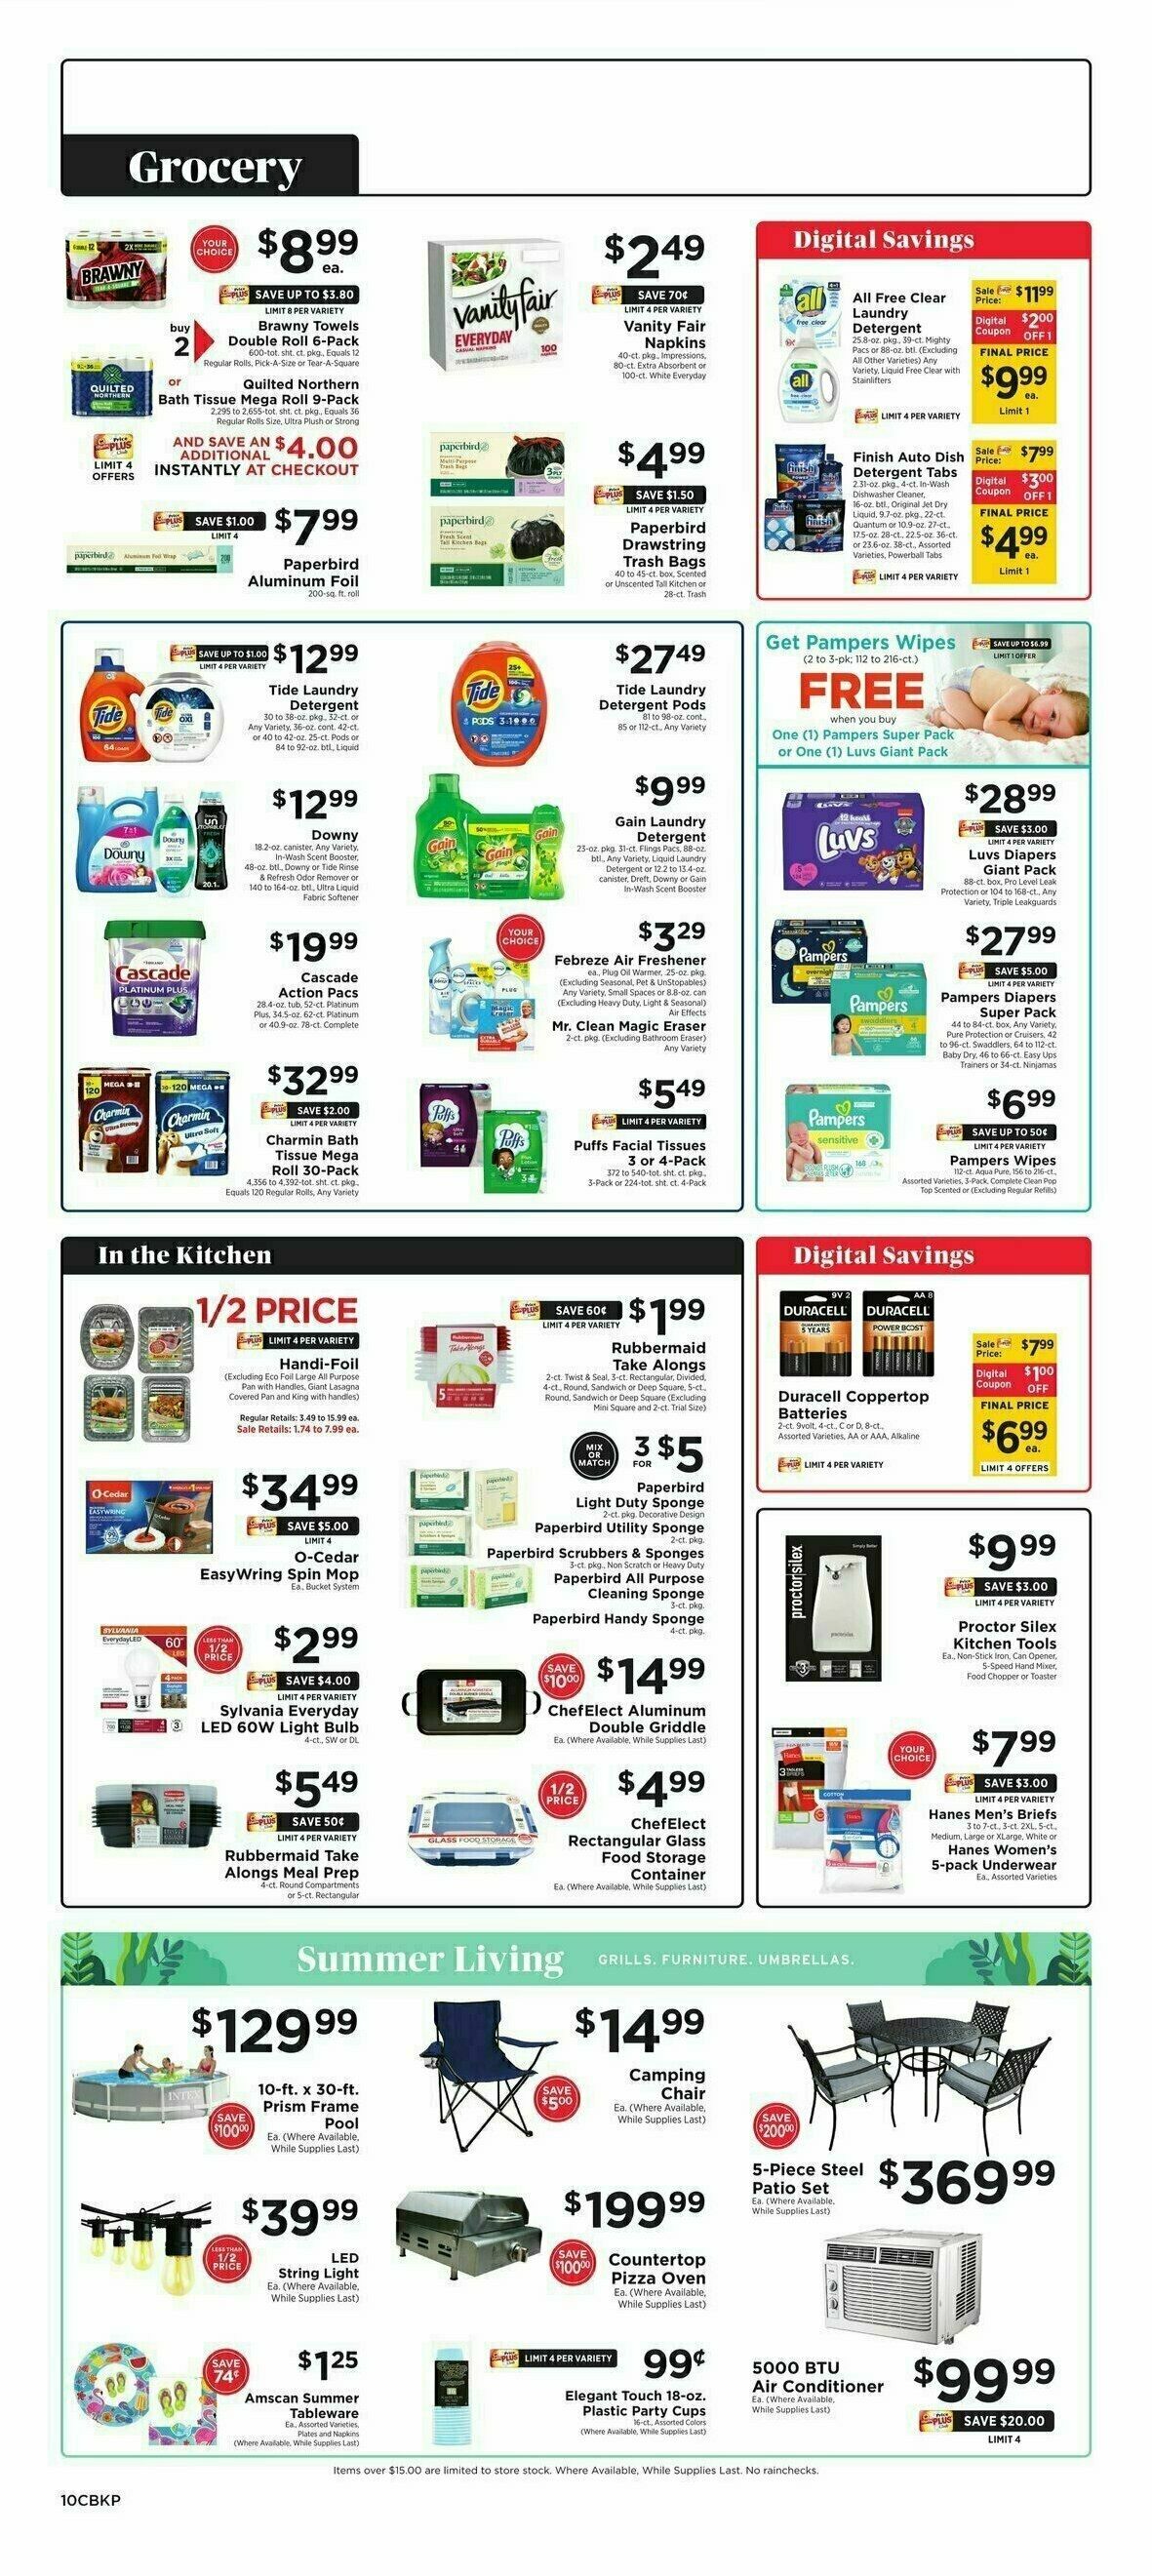 ShopRite Weekly Ad from June 28